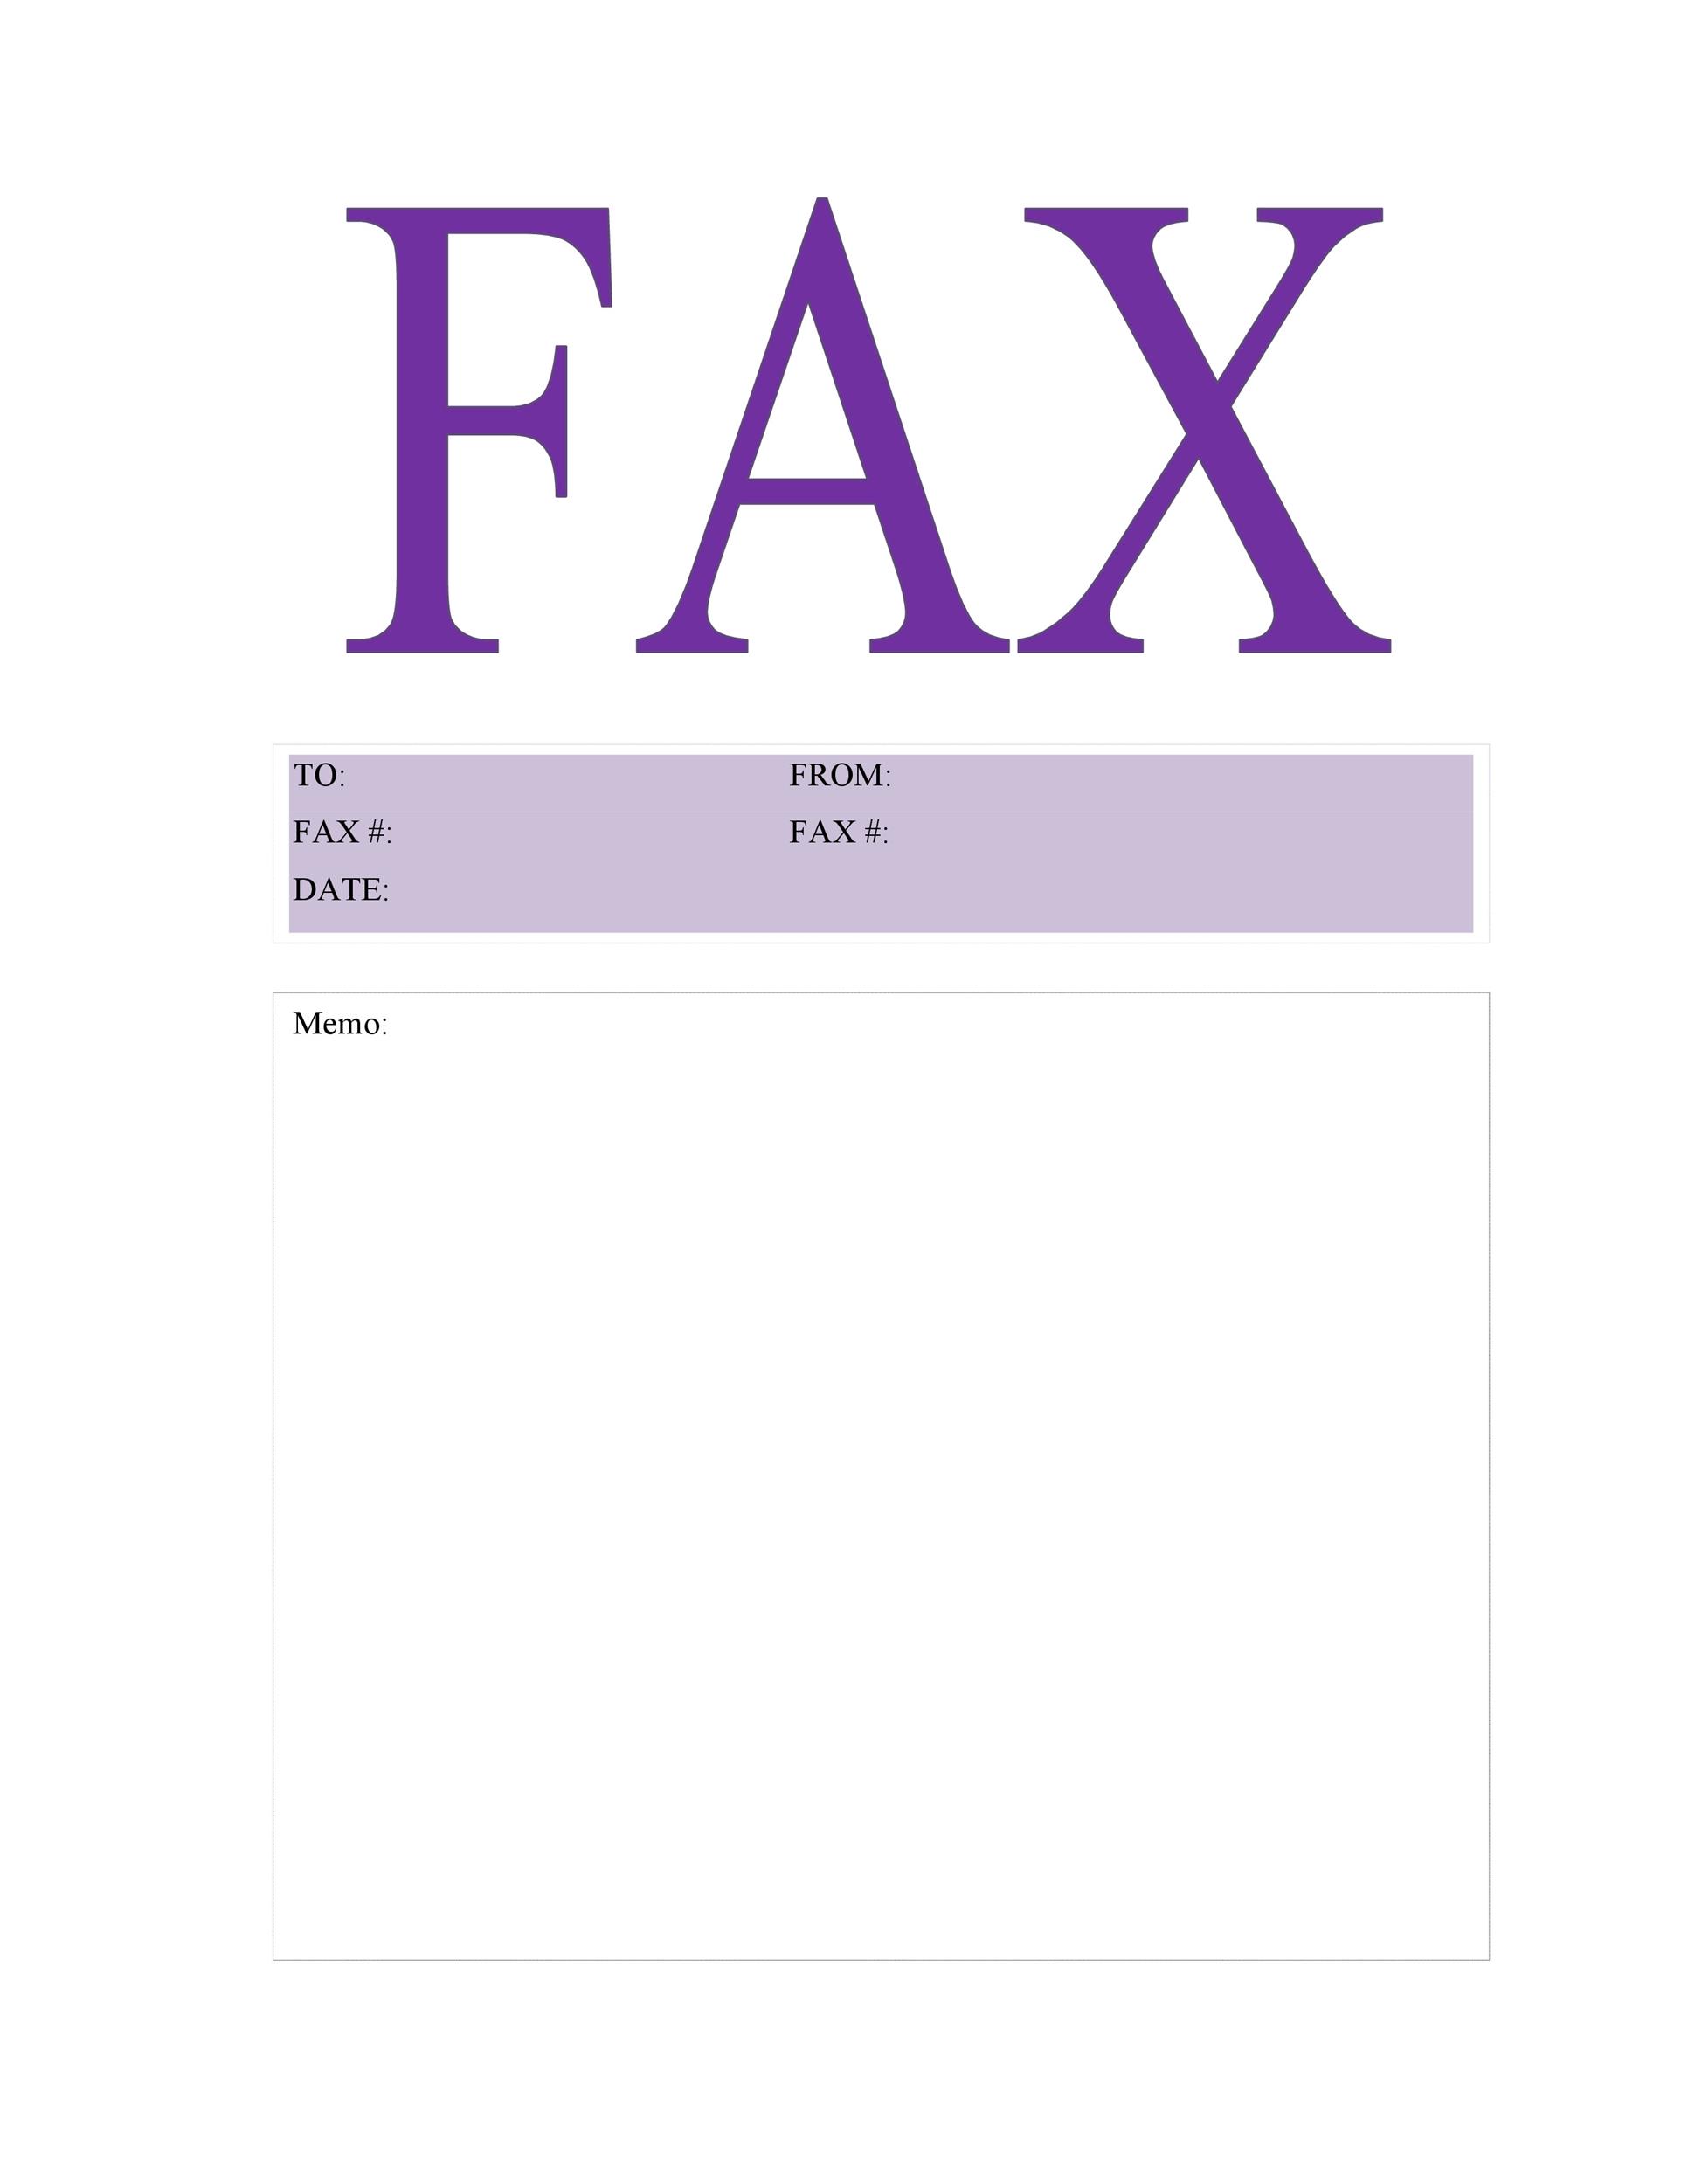 Attention fax cover letter